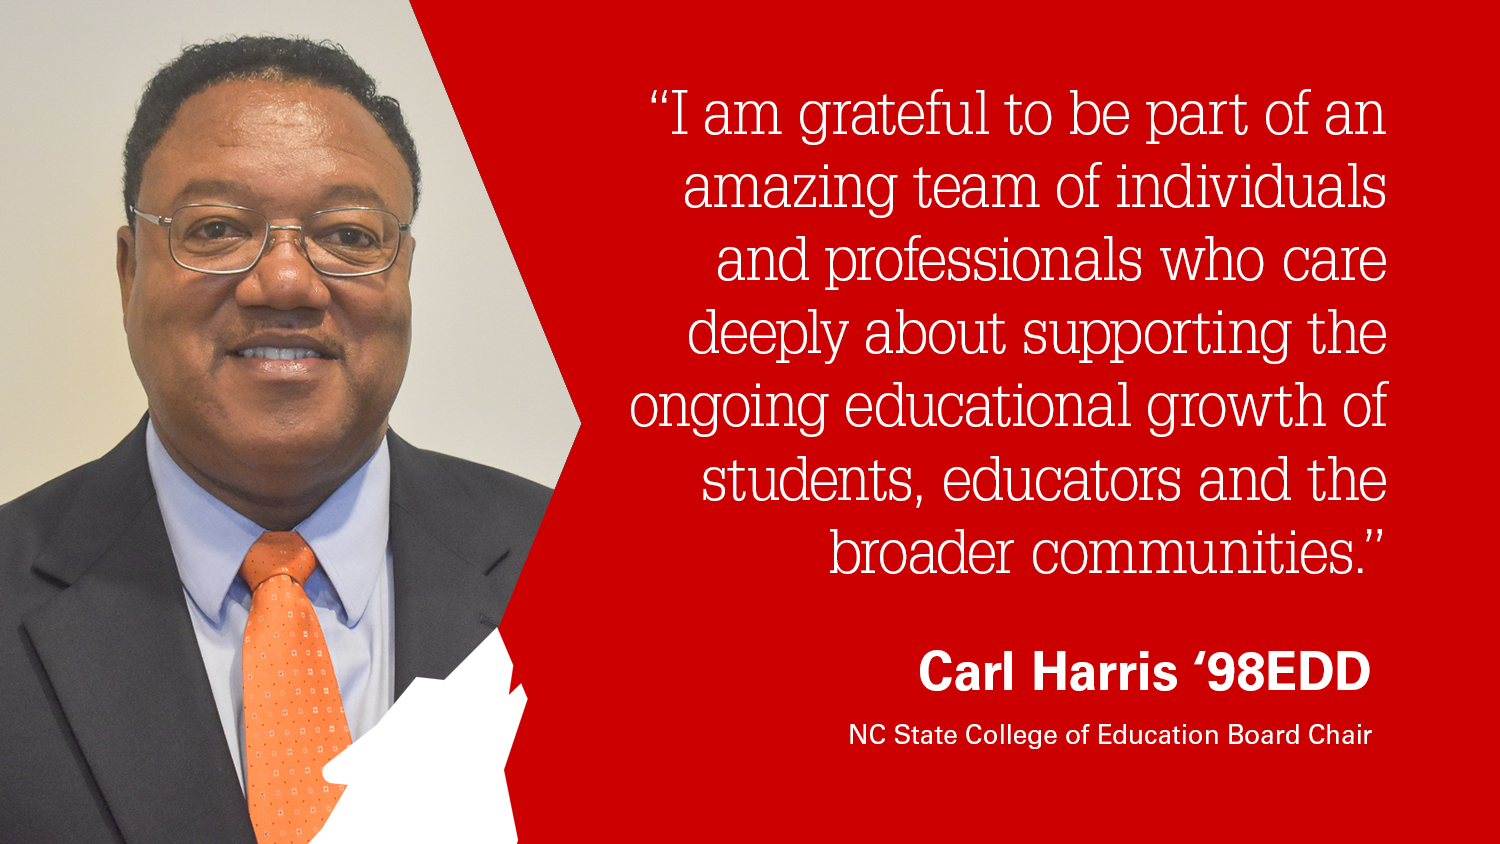 Photo of Carl Harris with quote: “I am grateful to be part of an amazing team of individuals and professionals who care deeply about supporting the ongoing educational growth of students, educators and the broader communities.”